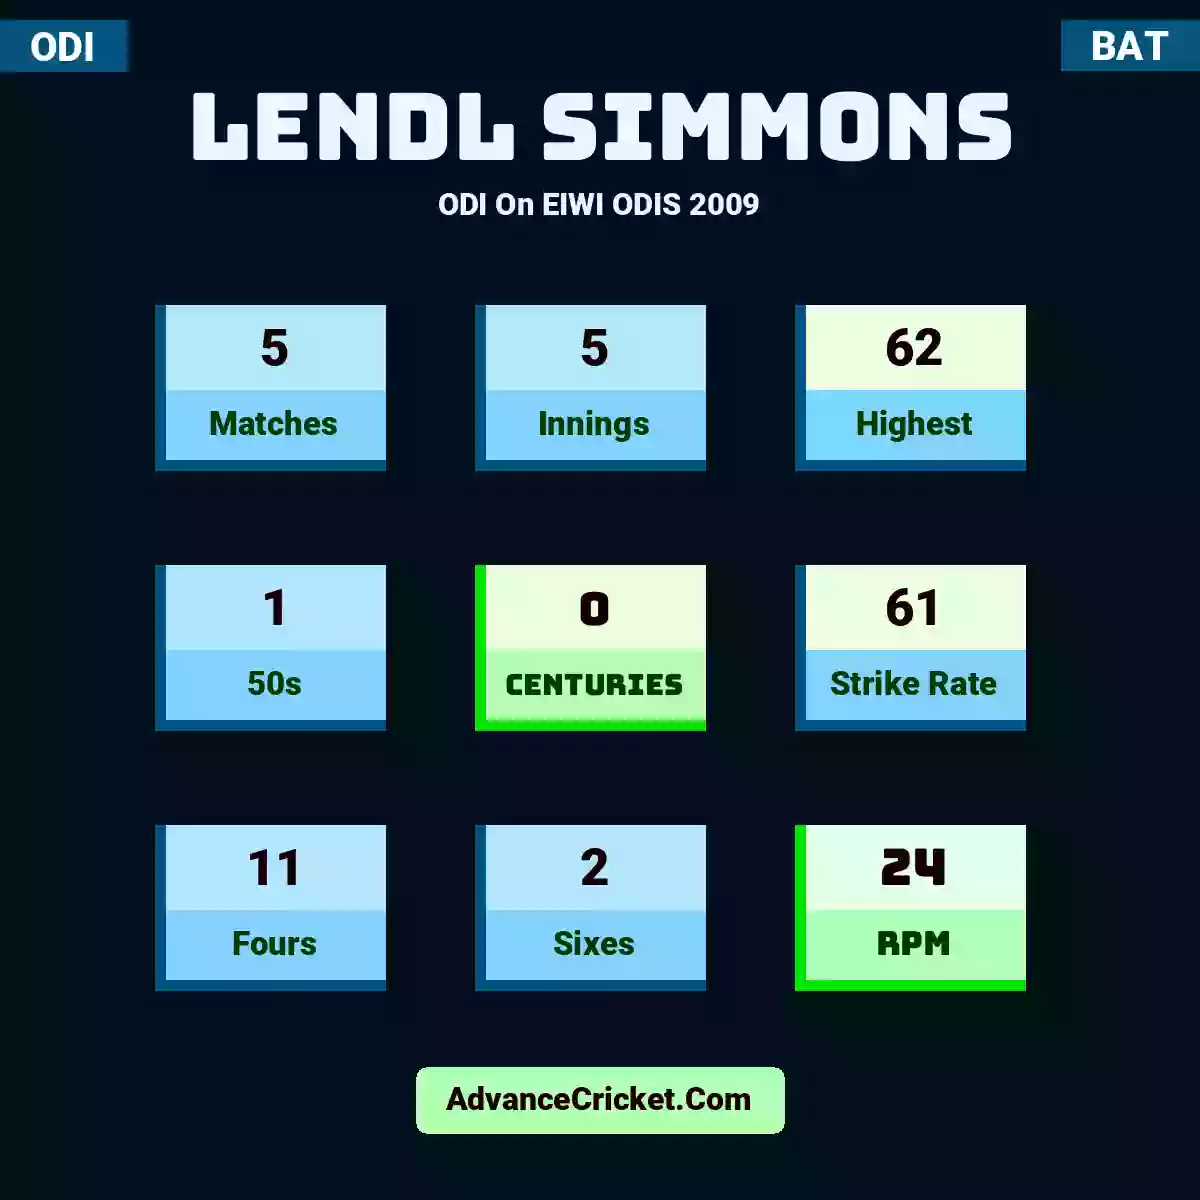 Lendl Simmons ODI  On EIWI ODIS 2009, Lendl Simmons played 5 matches, scored 62 runs as highest, 1 half-centuries, and 0 centuries, with a strike rate of 61. L.Simmons hit 11 fours and 2 sixes, with an RPM of 24.